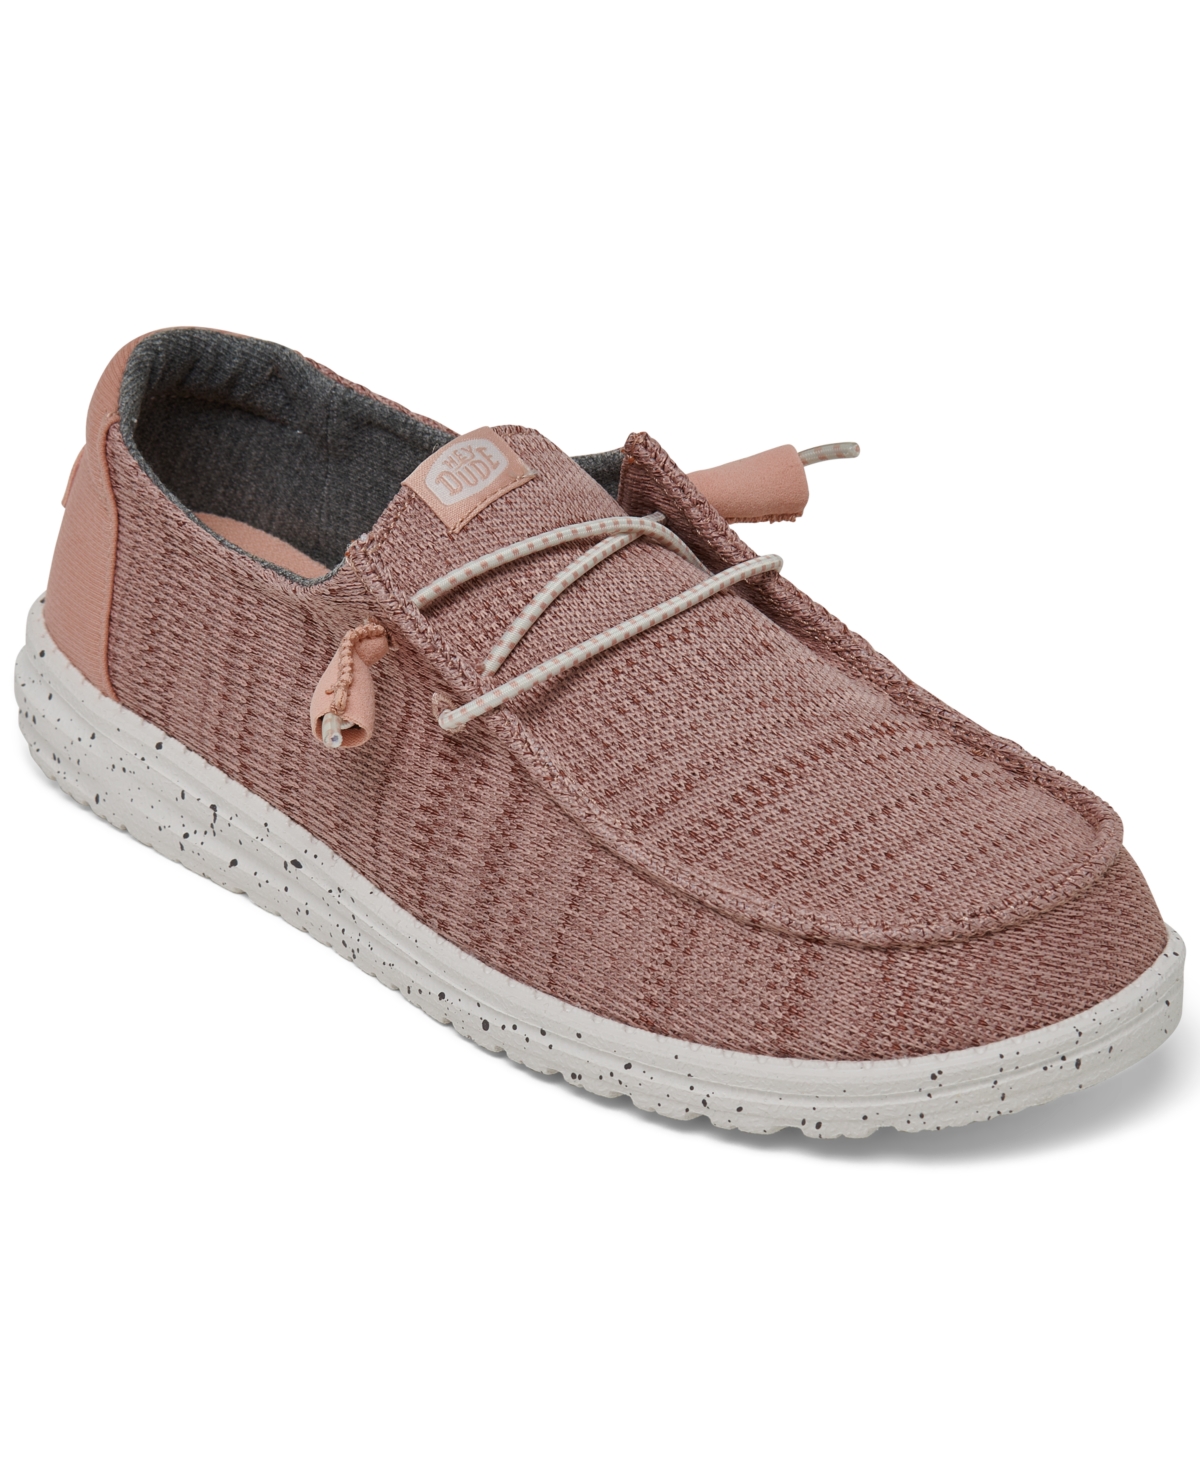 Women's Wendy Sport Mesh Casual Moccasin Sneakers from Finish Line - Pink